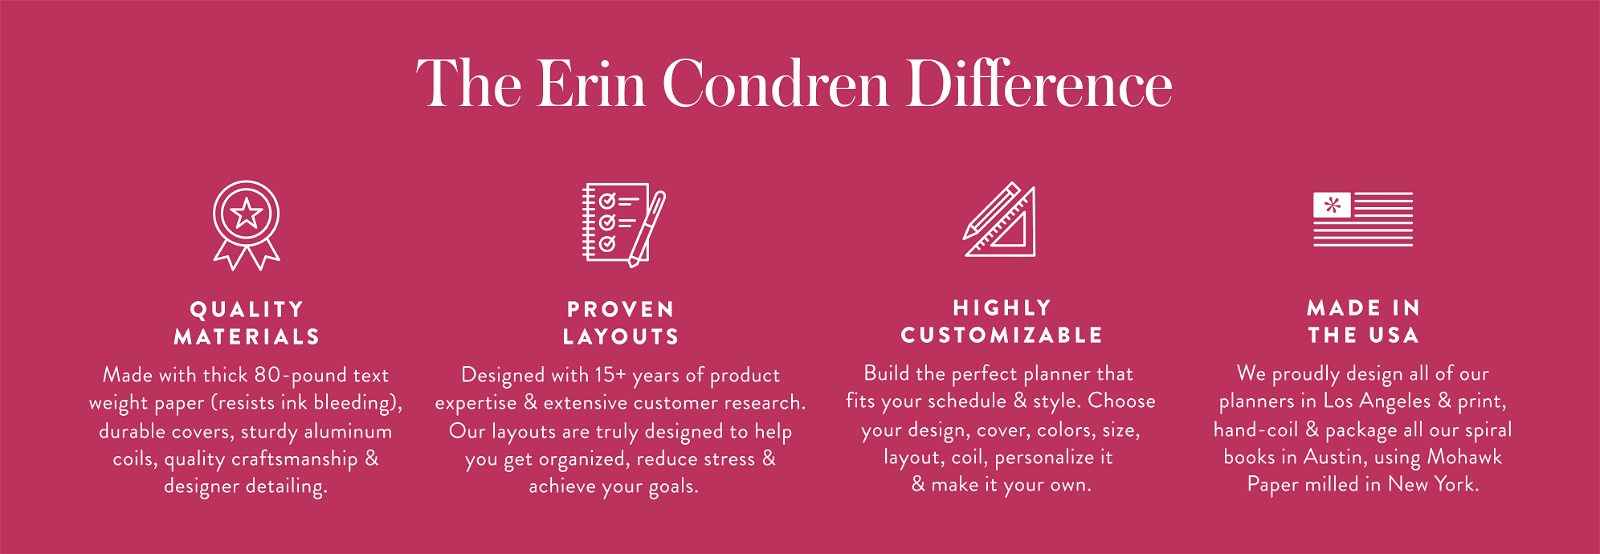 The Erin Condren Difference Infographic magenta horizontal icons and text